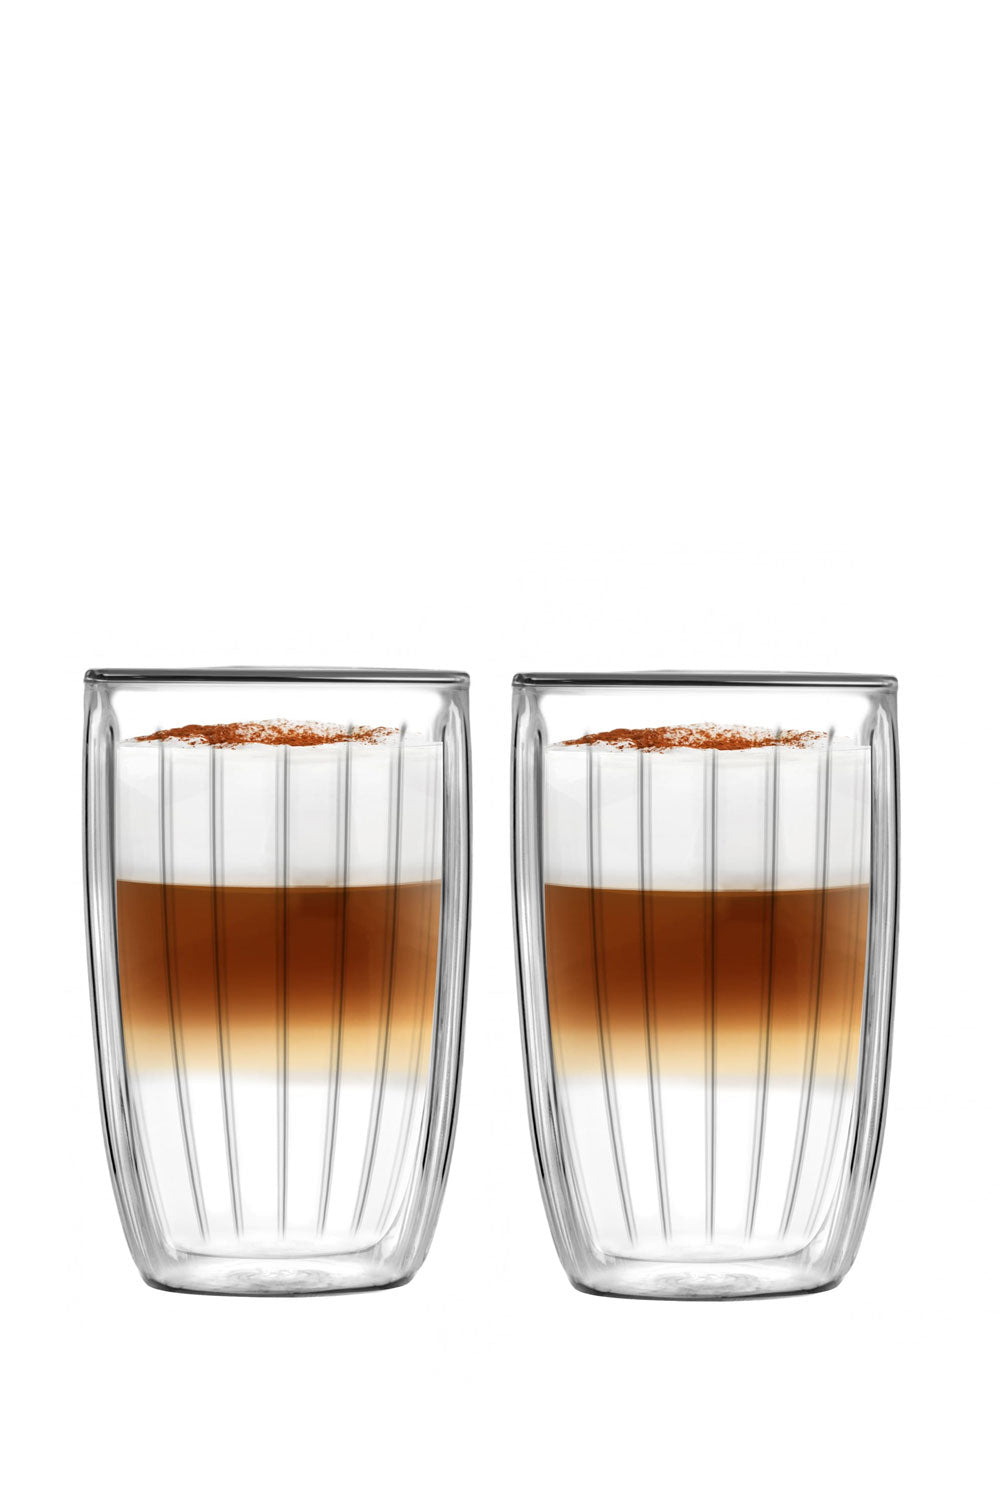 Tulip Double Wall High Glasses, 350 ml, Set of 2 - Maison7